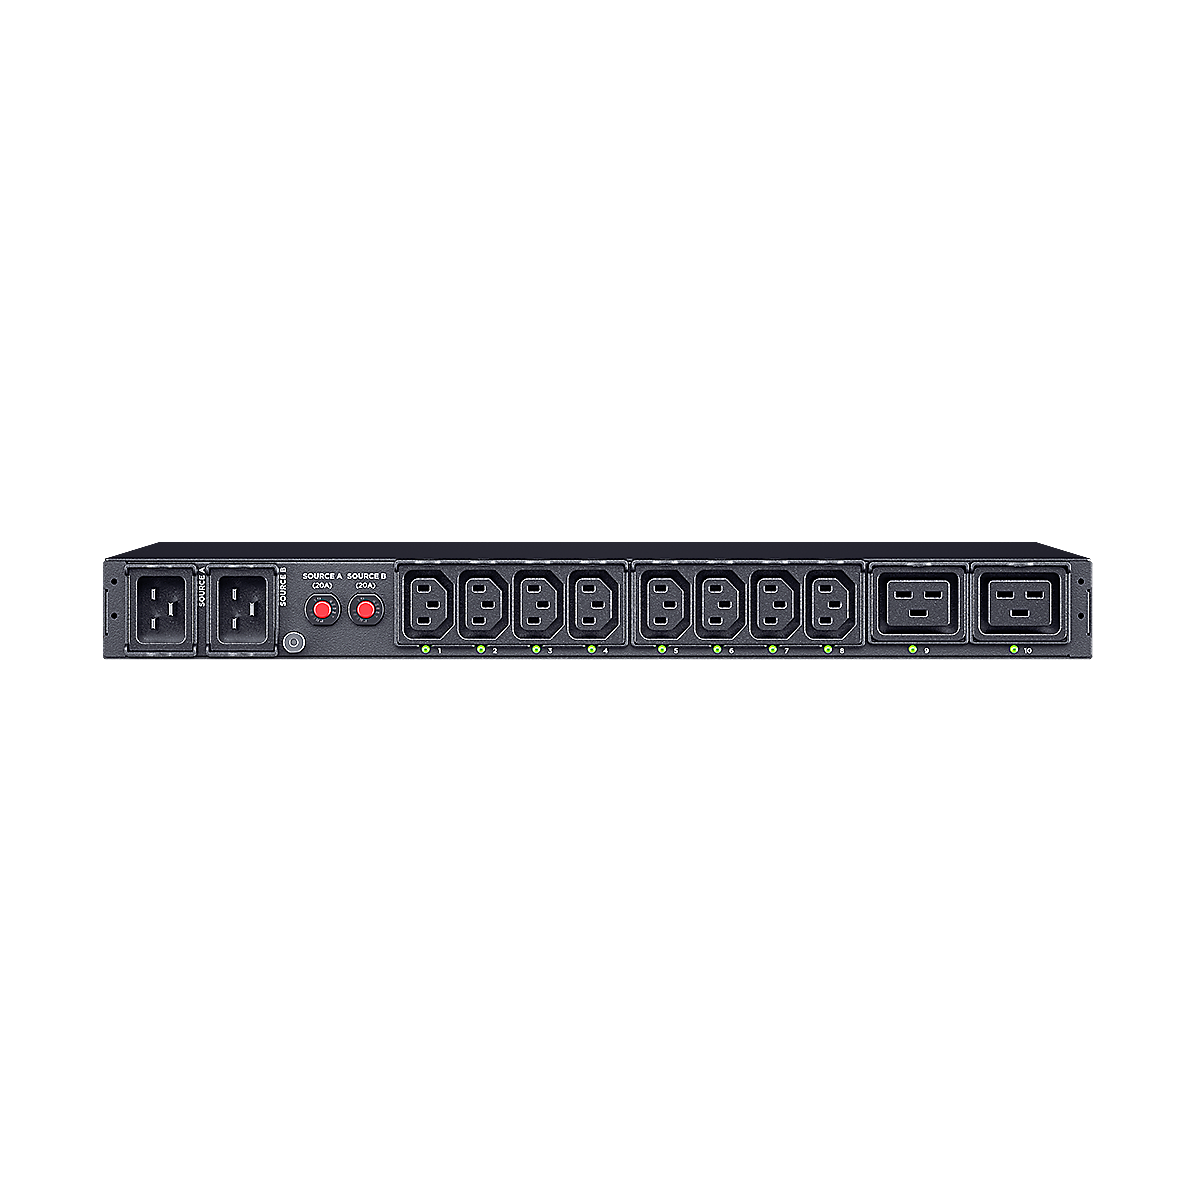 CyberPower Systems Power Distribution Unit - PDU44005